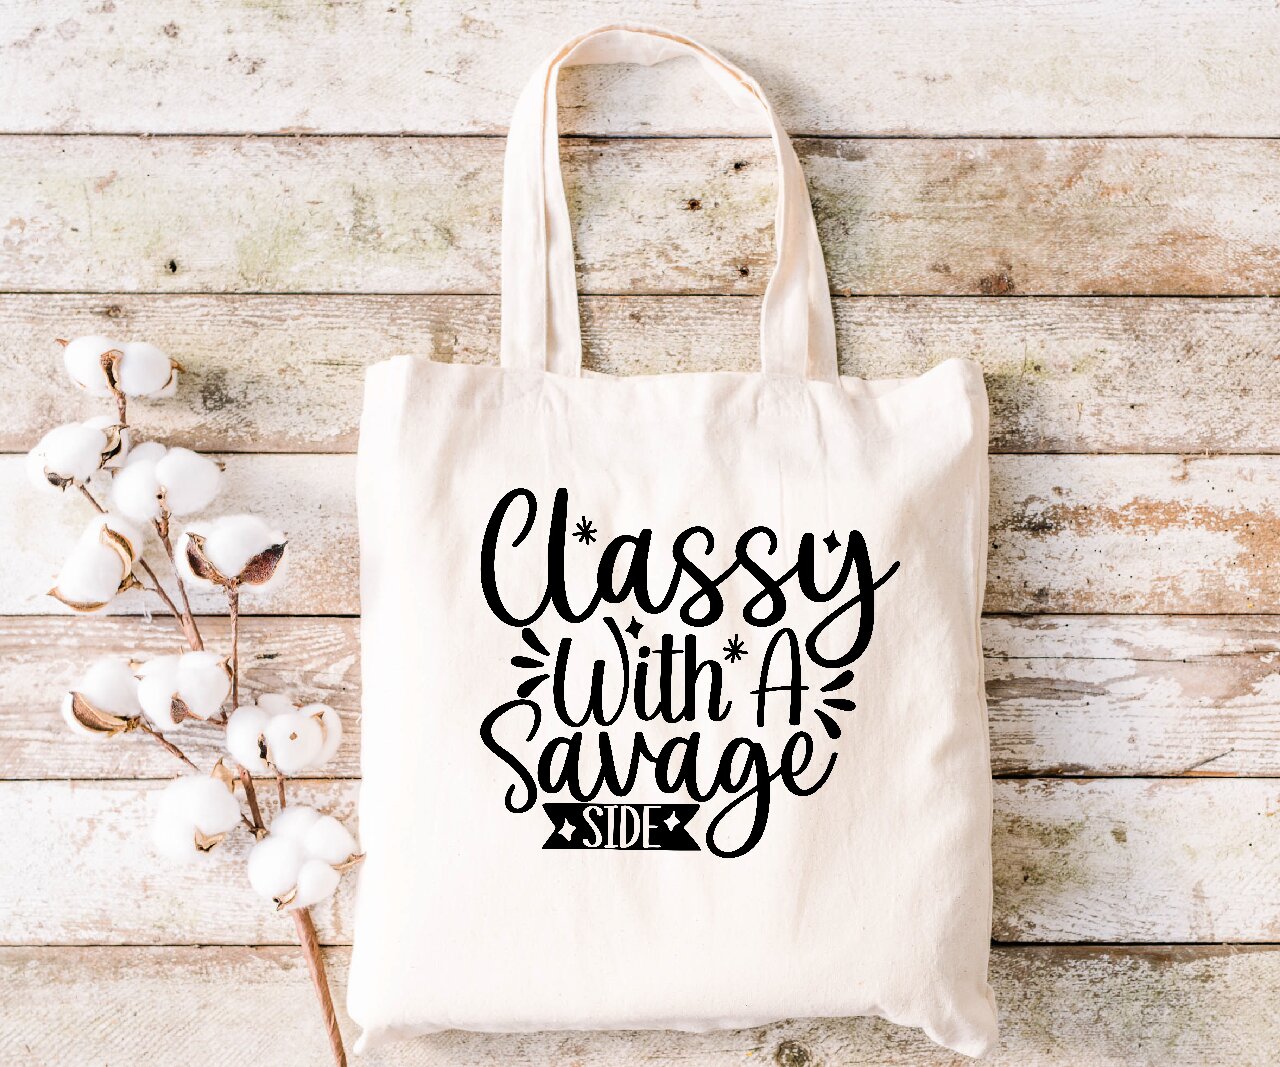 Classy With A Savage Side - Tote Bag